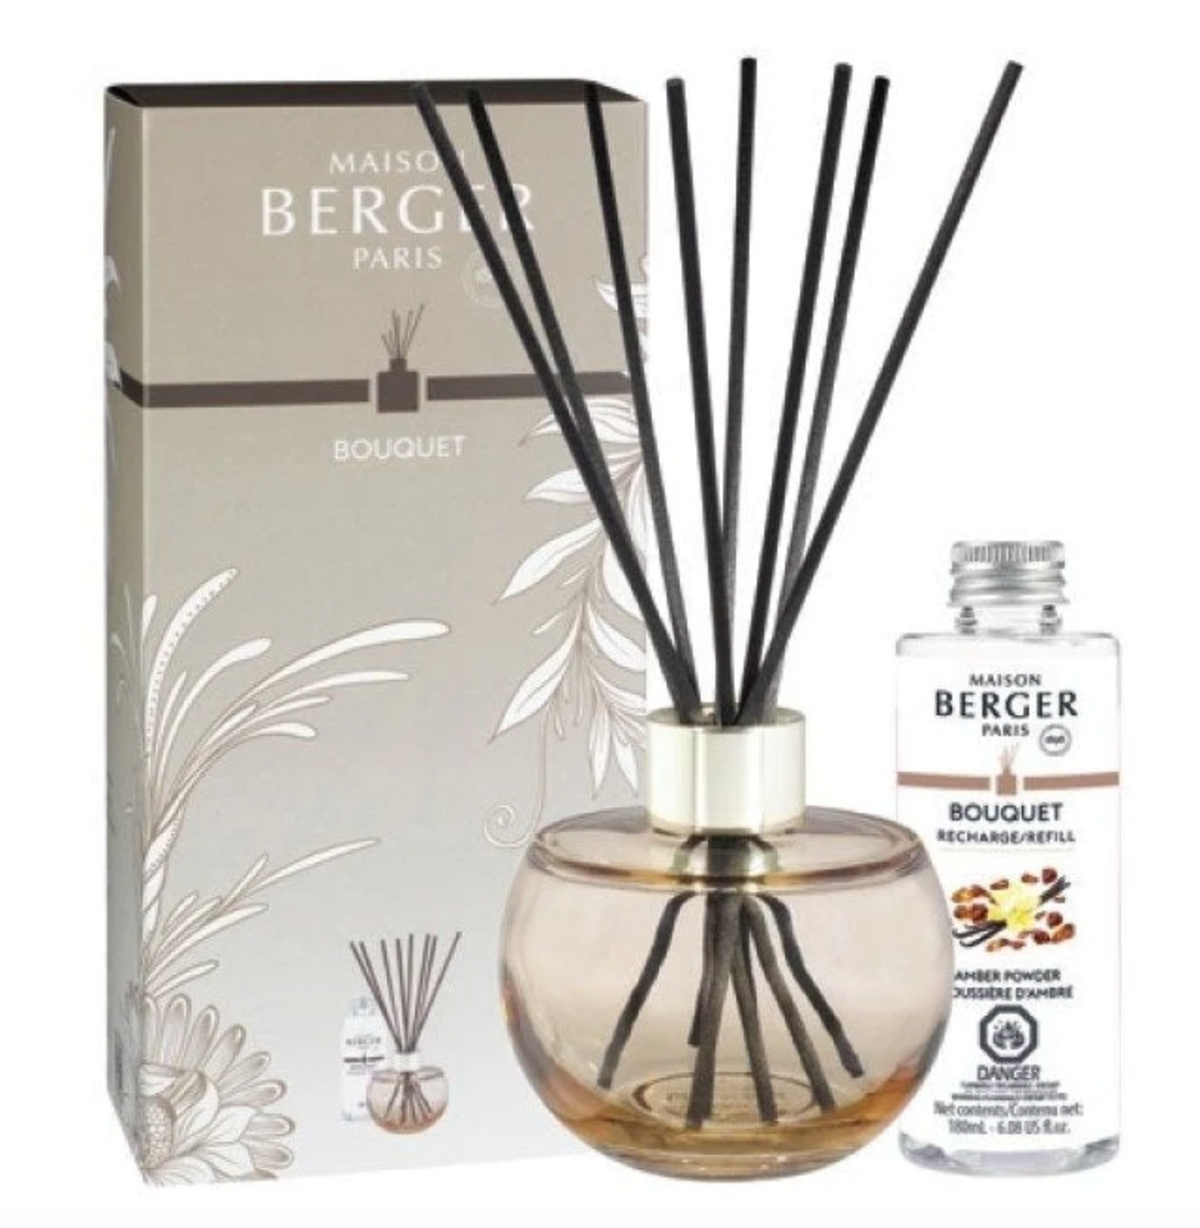 Maison Berger Bouquet Holly Beige Amber Powder Reed Diffuser Set